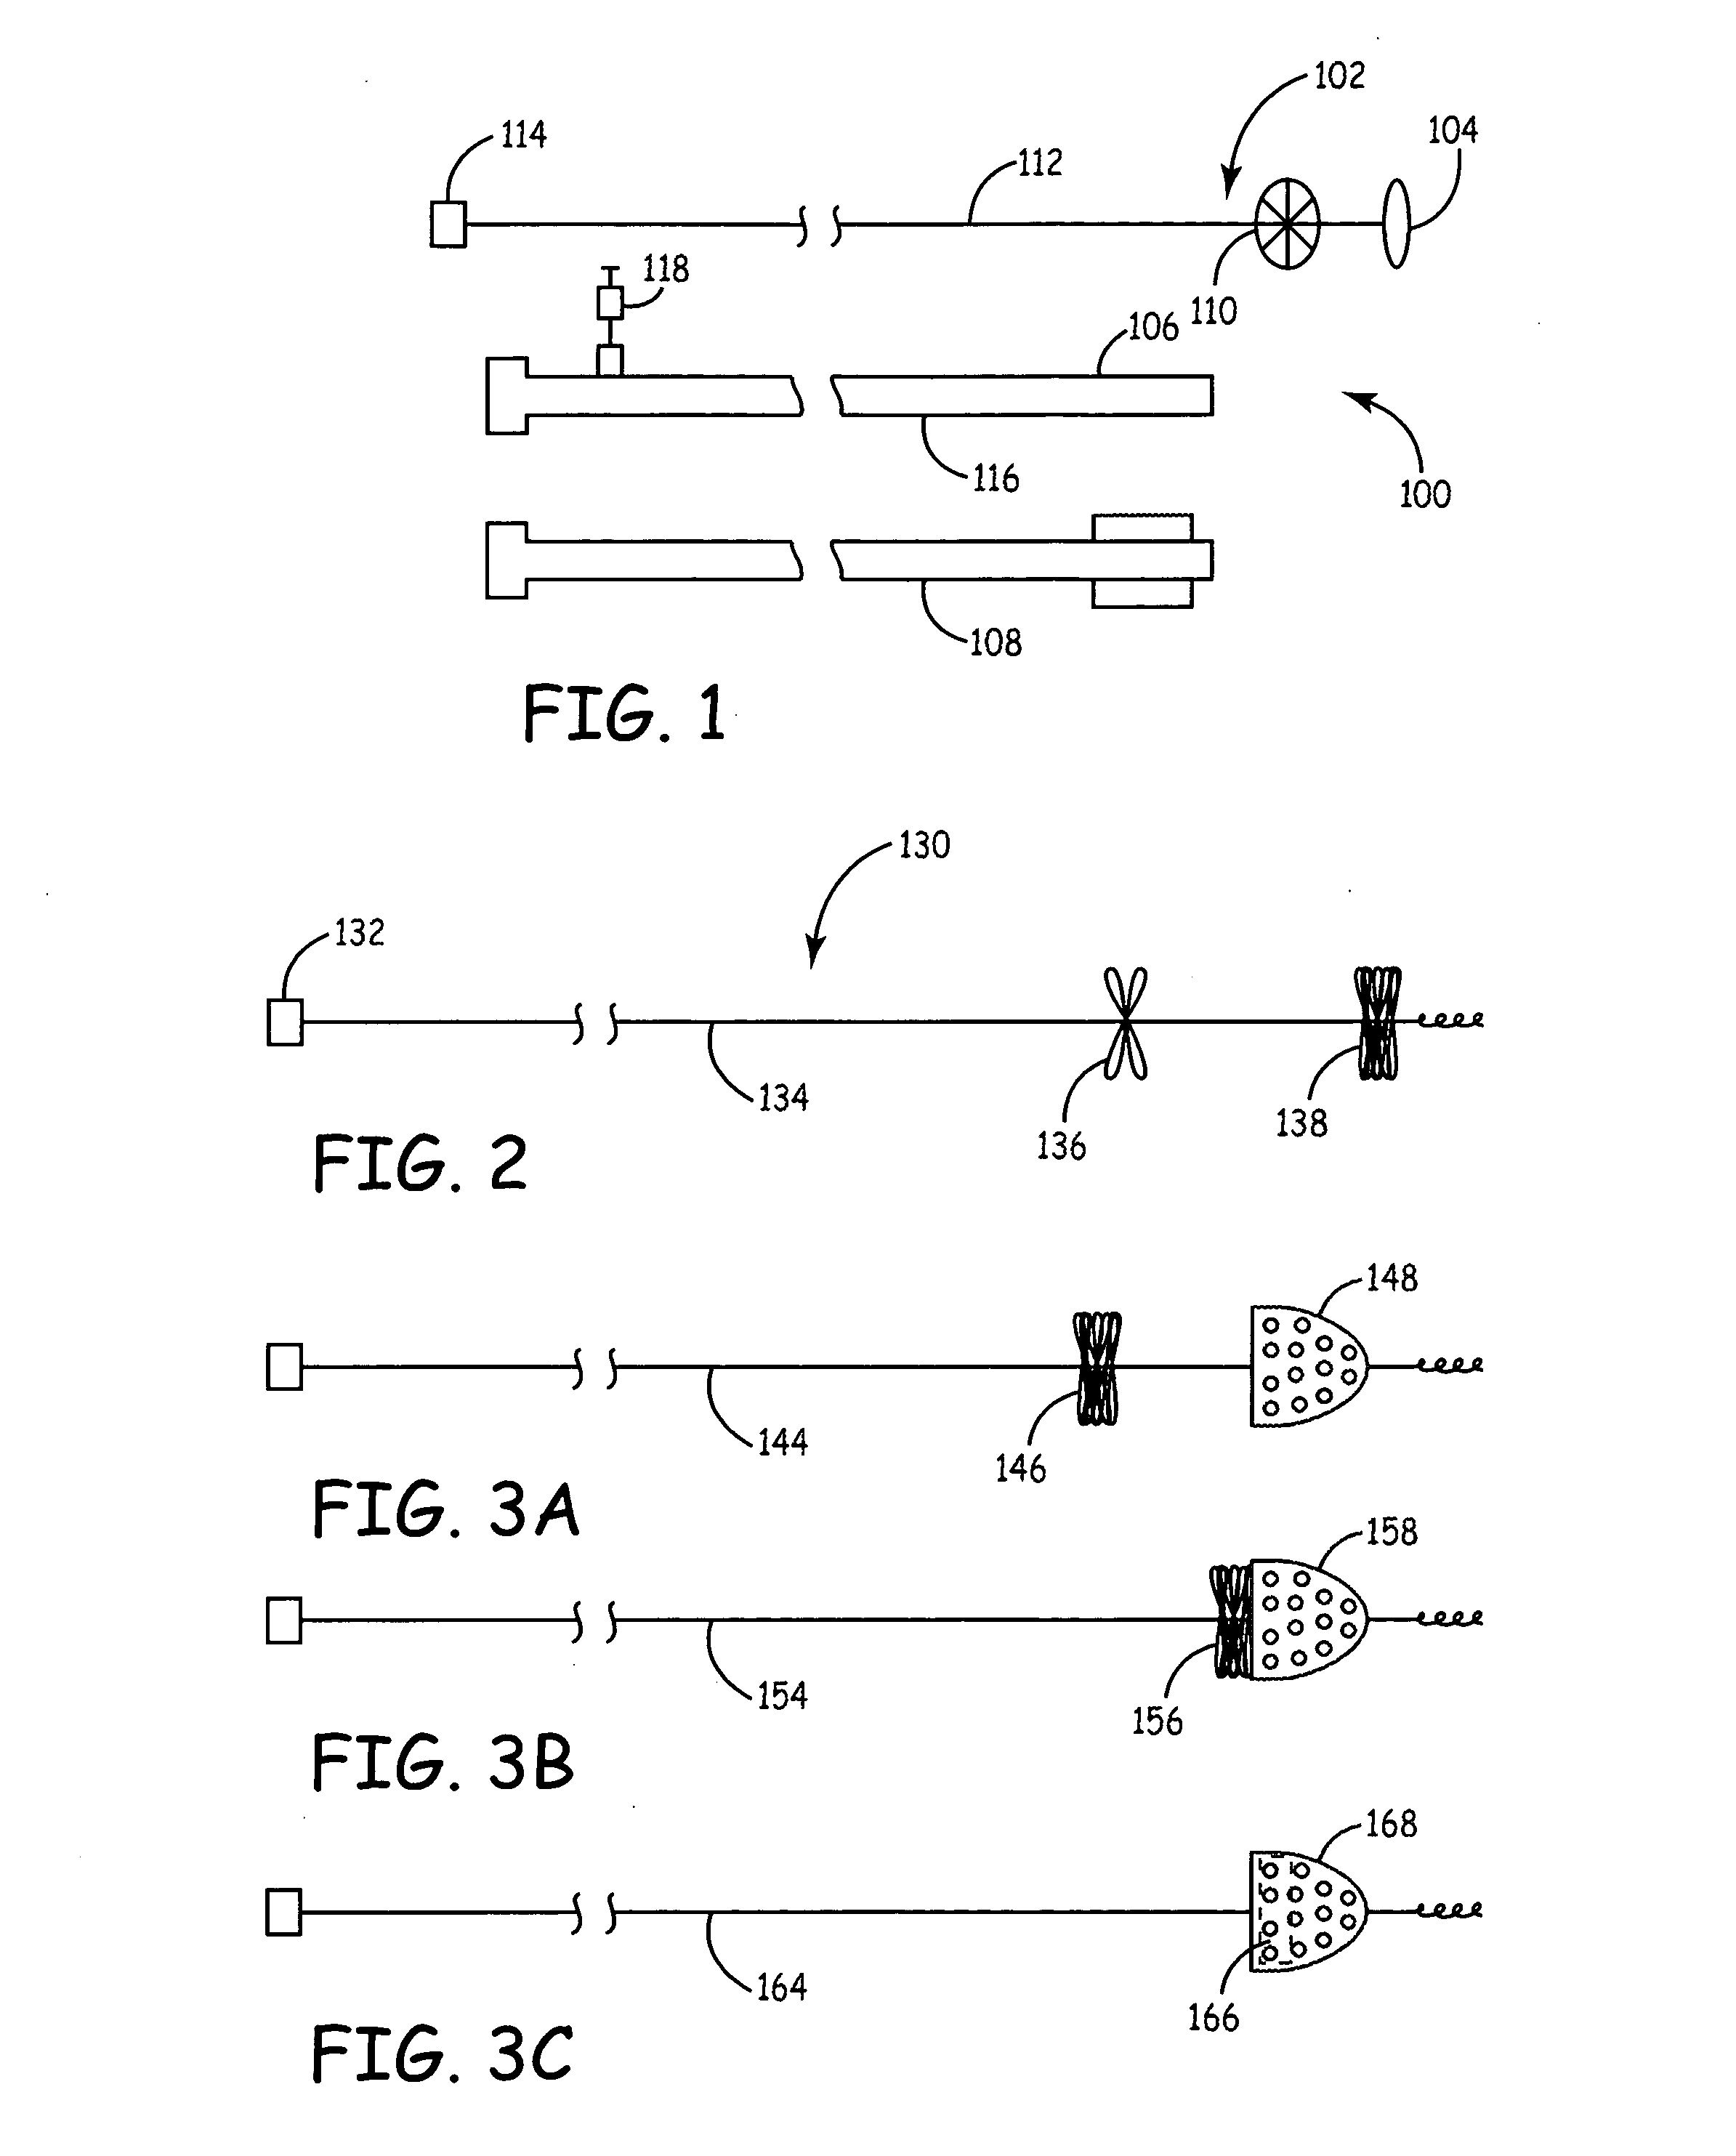 Embolectomy procedures with a device comprising a polymer and devices with polymer matrices and supports